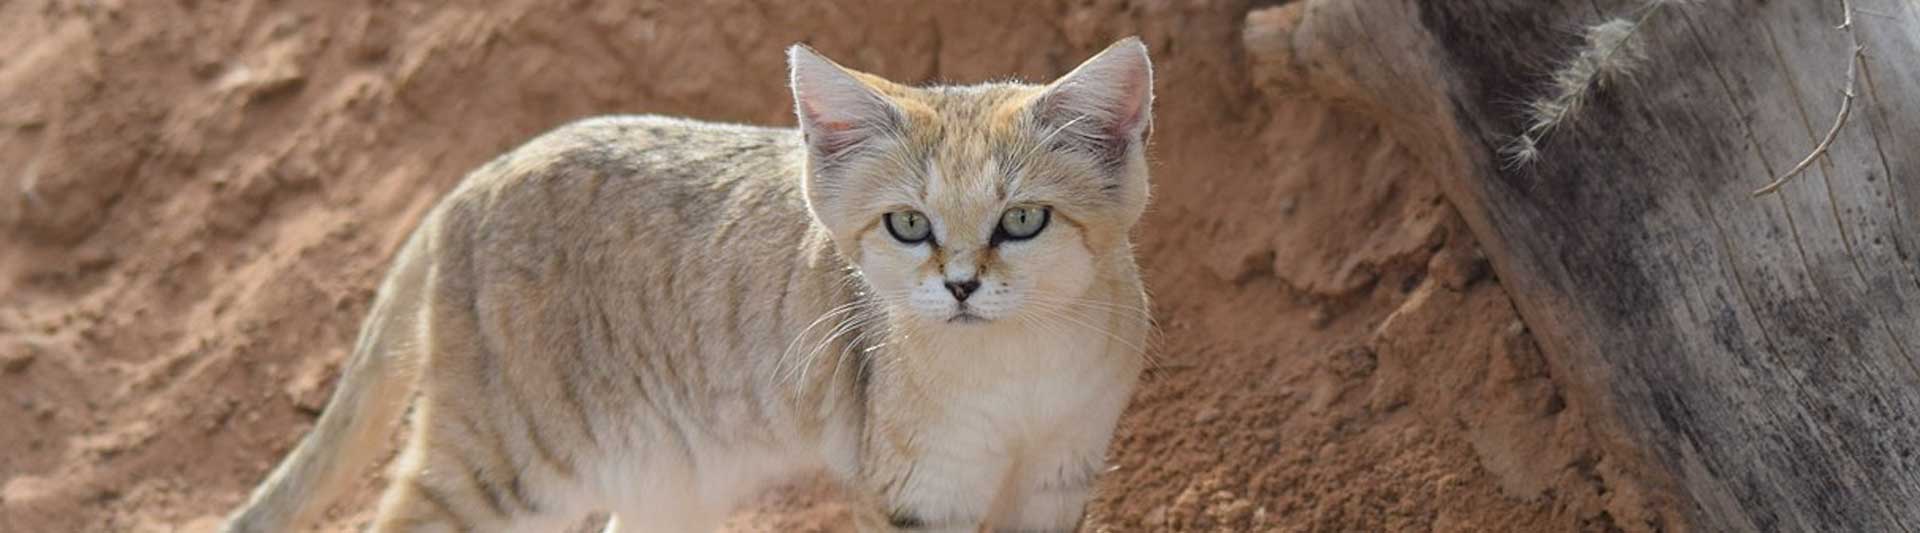 21 Sand Cat Facts About These Cute Desert Warriors